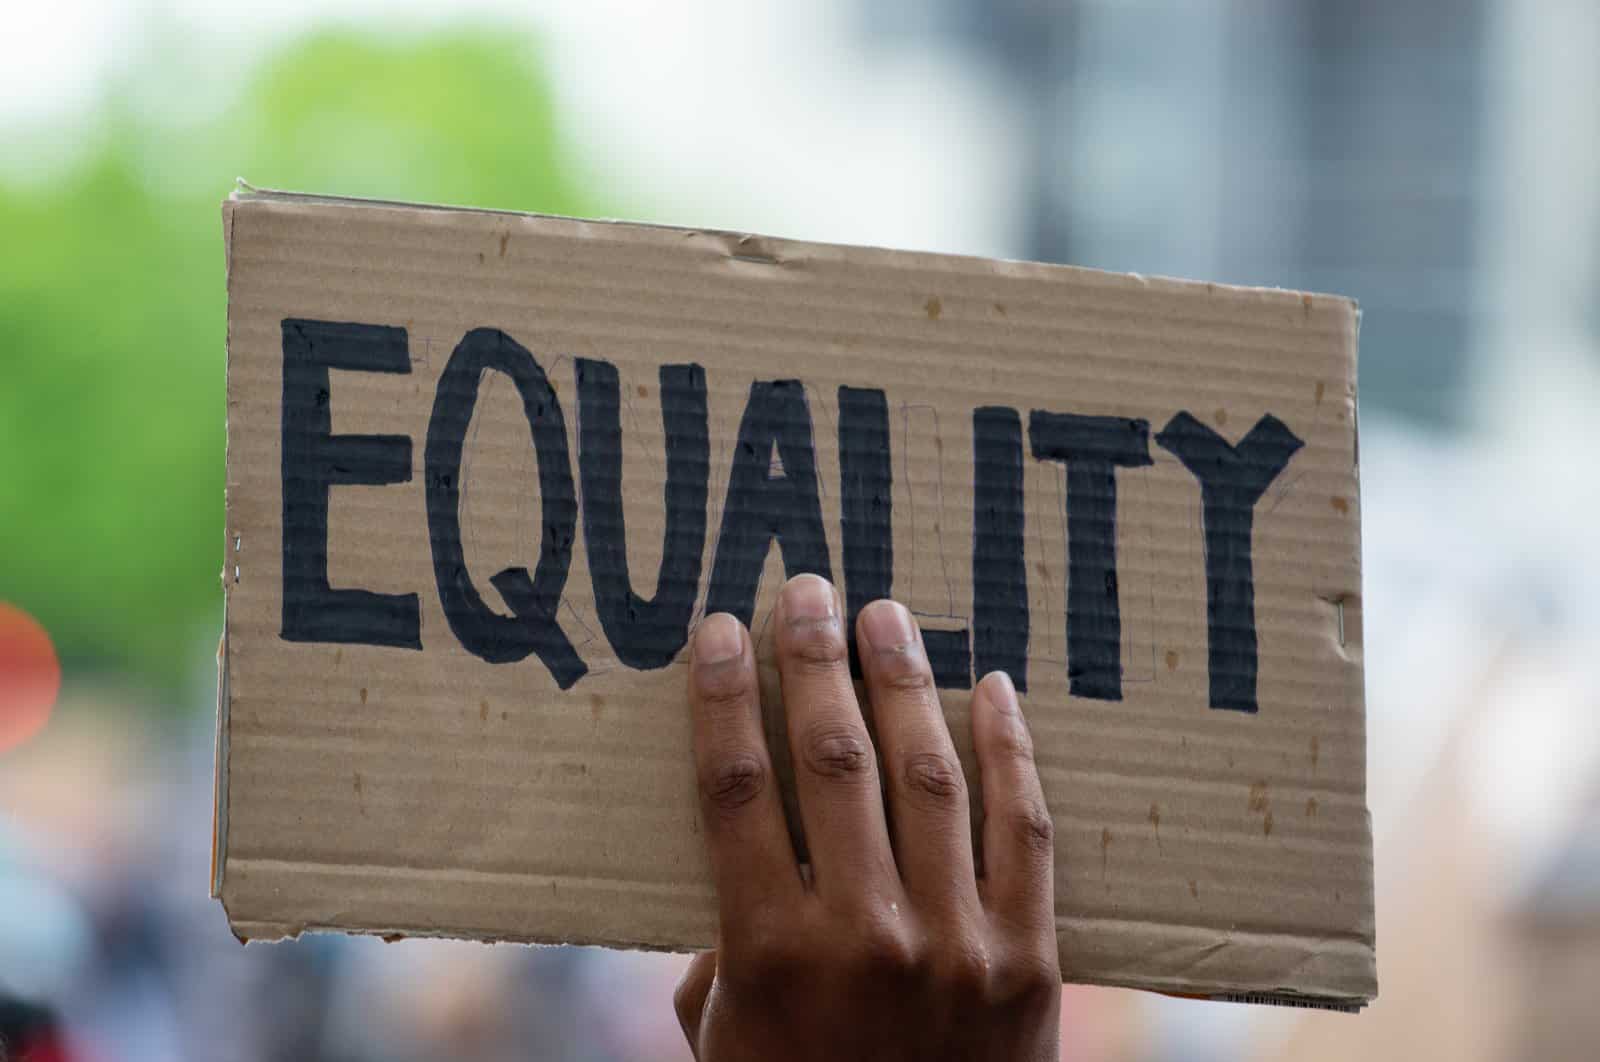 Image Credit: Shutterstock / John Gomez <p><span>The debate over the Equality Act, which seeks to provide broader protections for LGBTQ+ individuals, has exposed divisions among feminists over concerns that it might undermine sex-based rights and protections for women.</span></p>